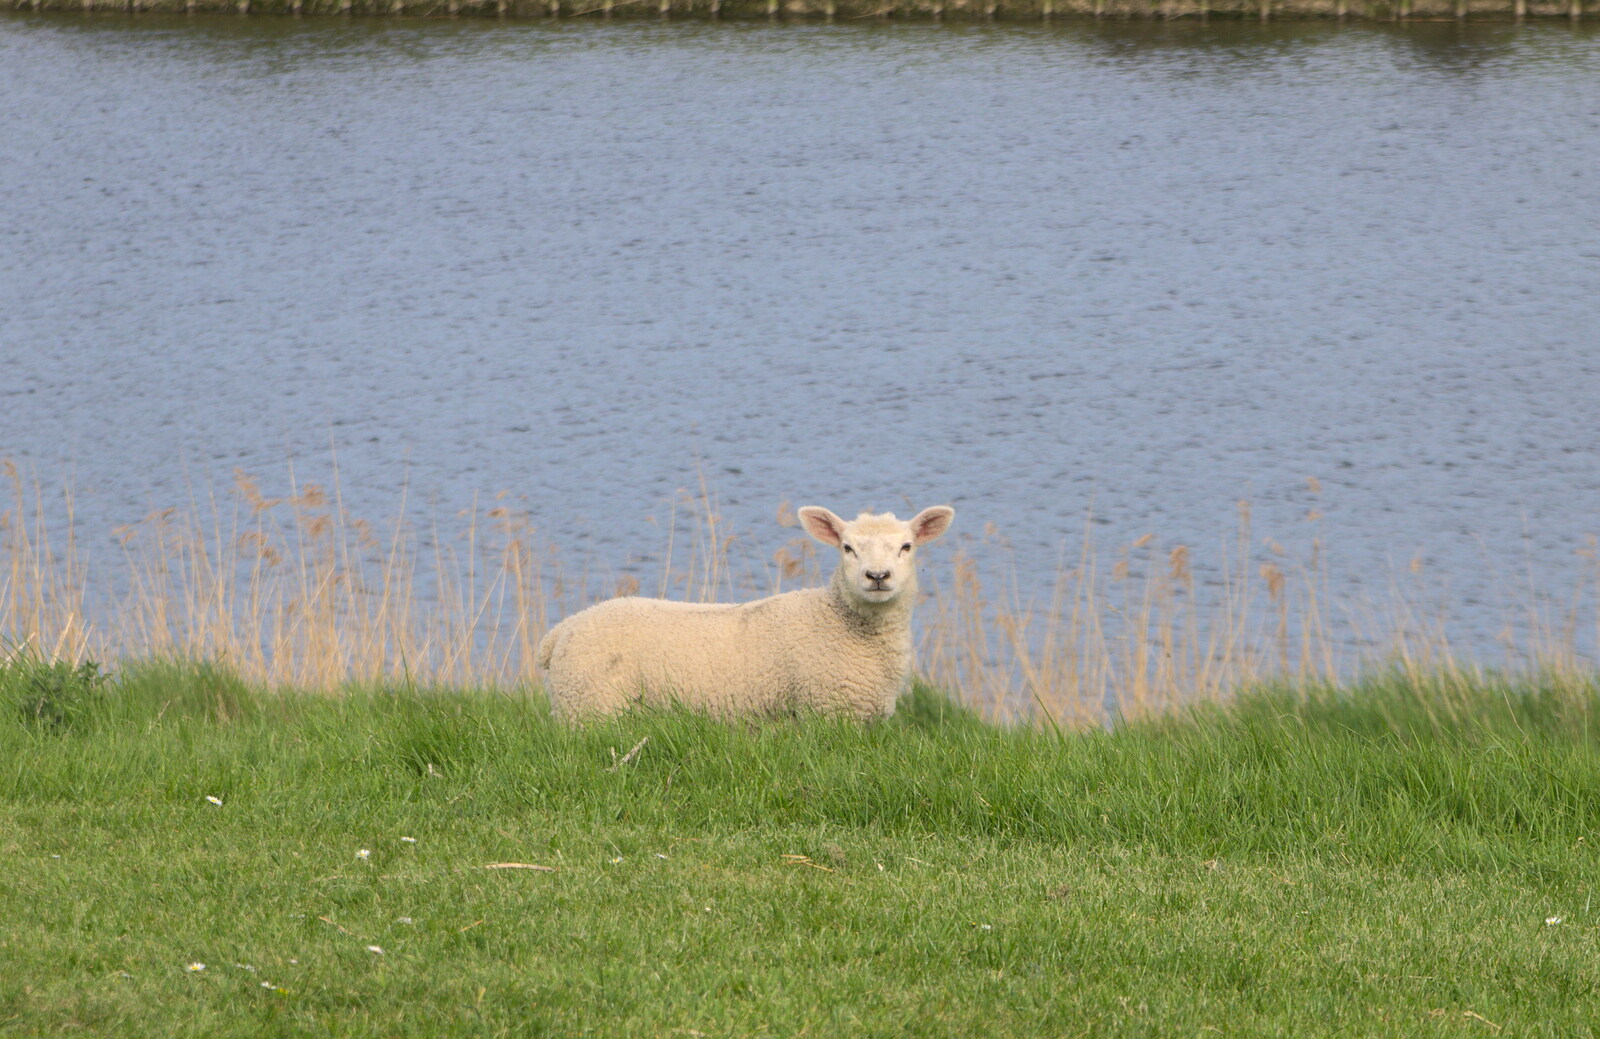 A lamb from The BSCC Cycling Weekender, Outwell, West Norfolk - 7th May 2016